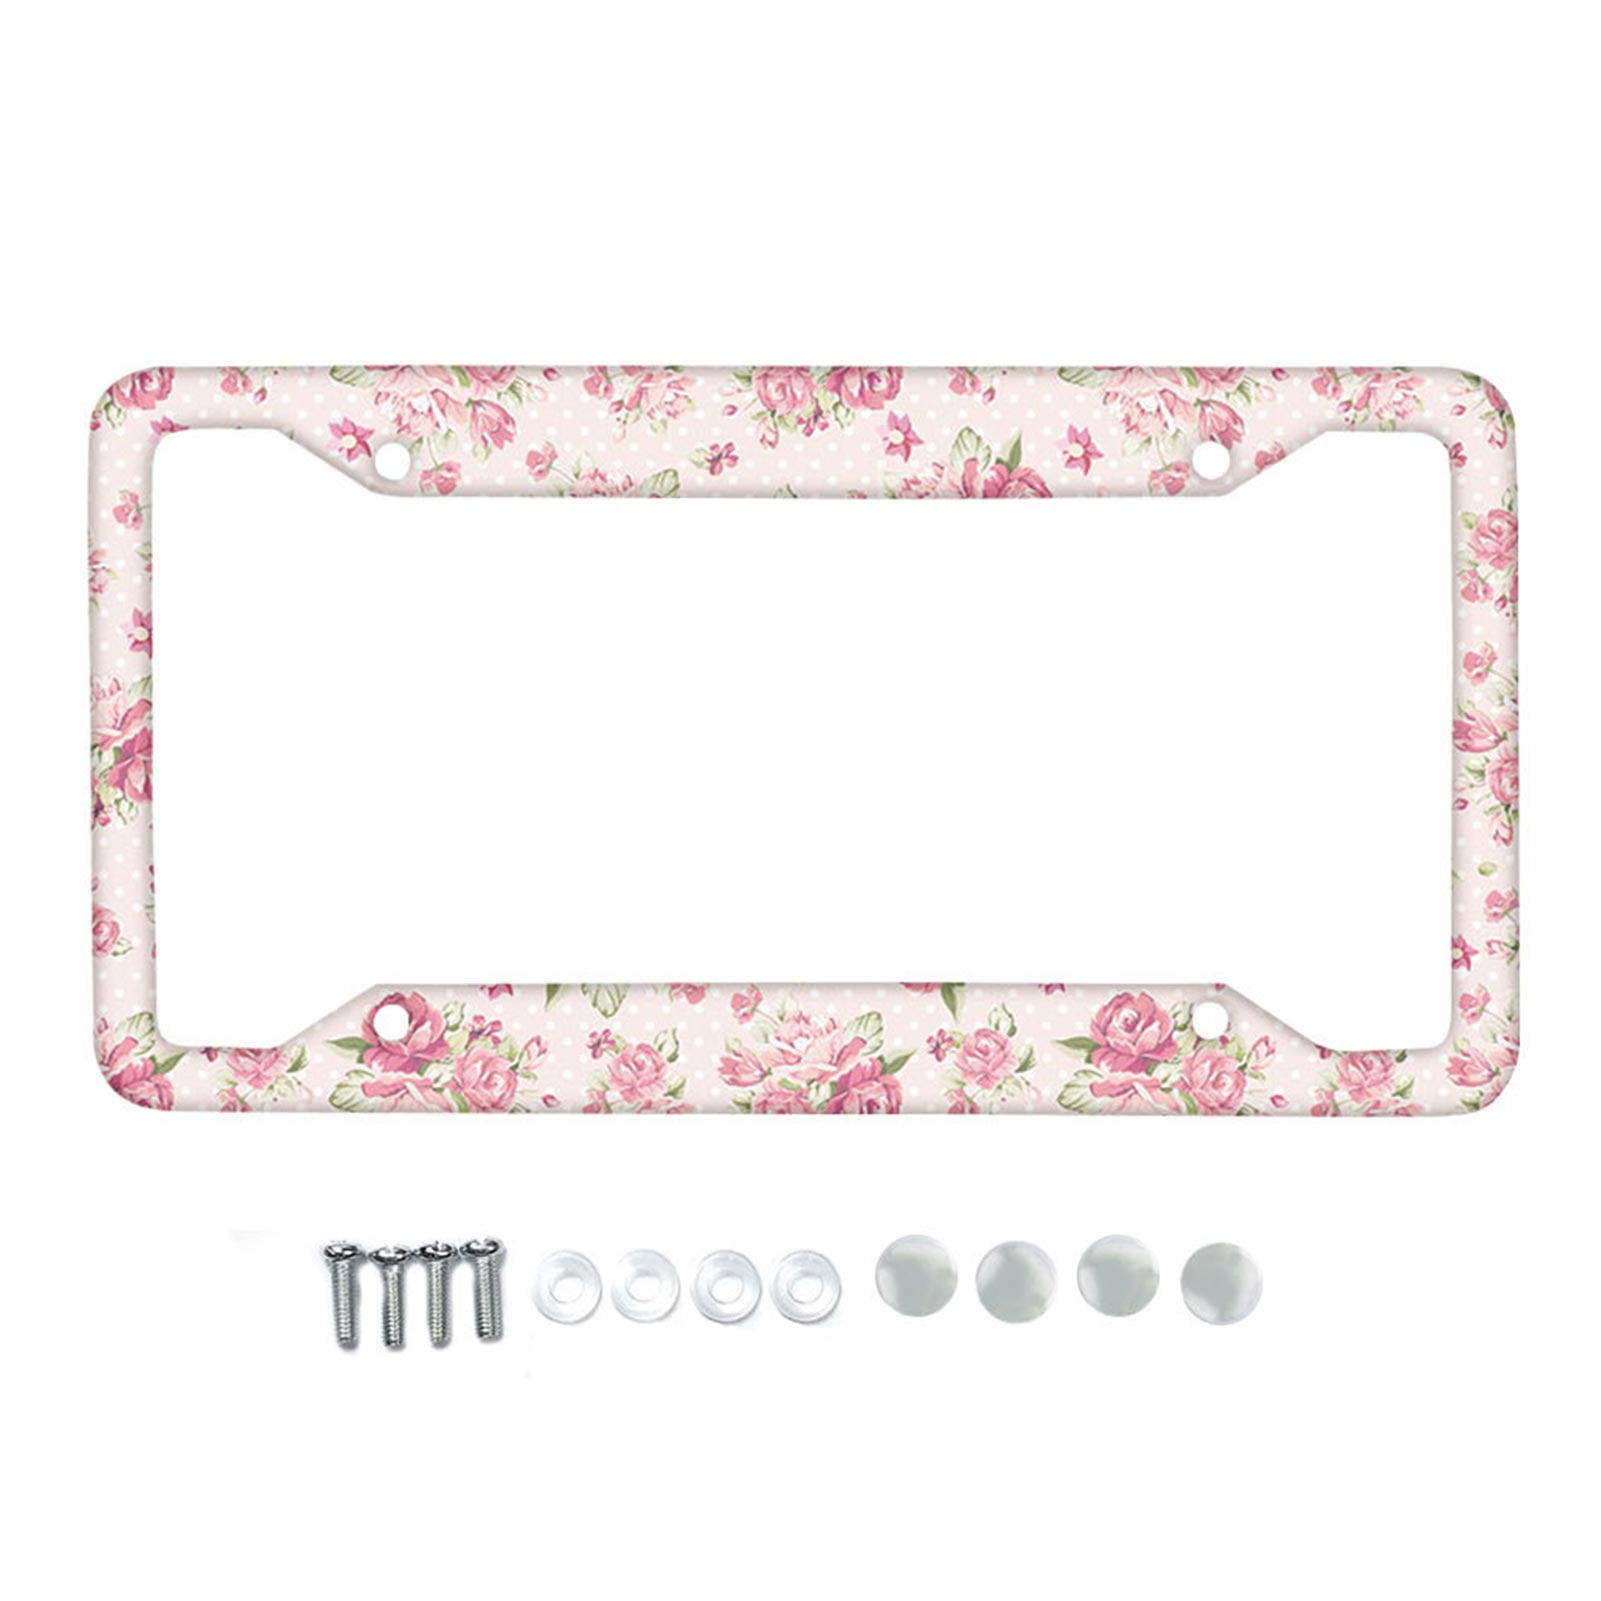 Colourful Easter Egg Alumina License Plate Frame Tag Holder with Screw Cap Covers for Adult 